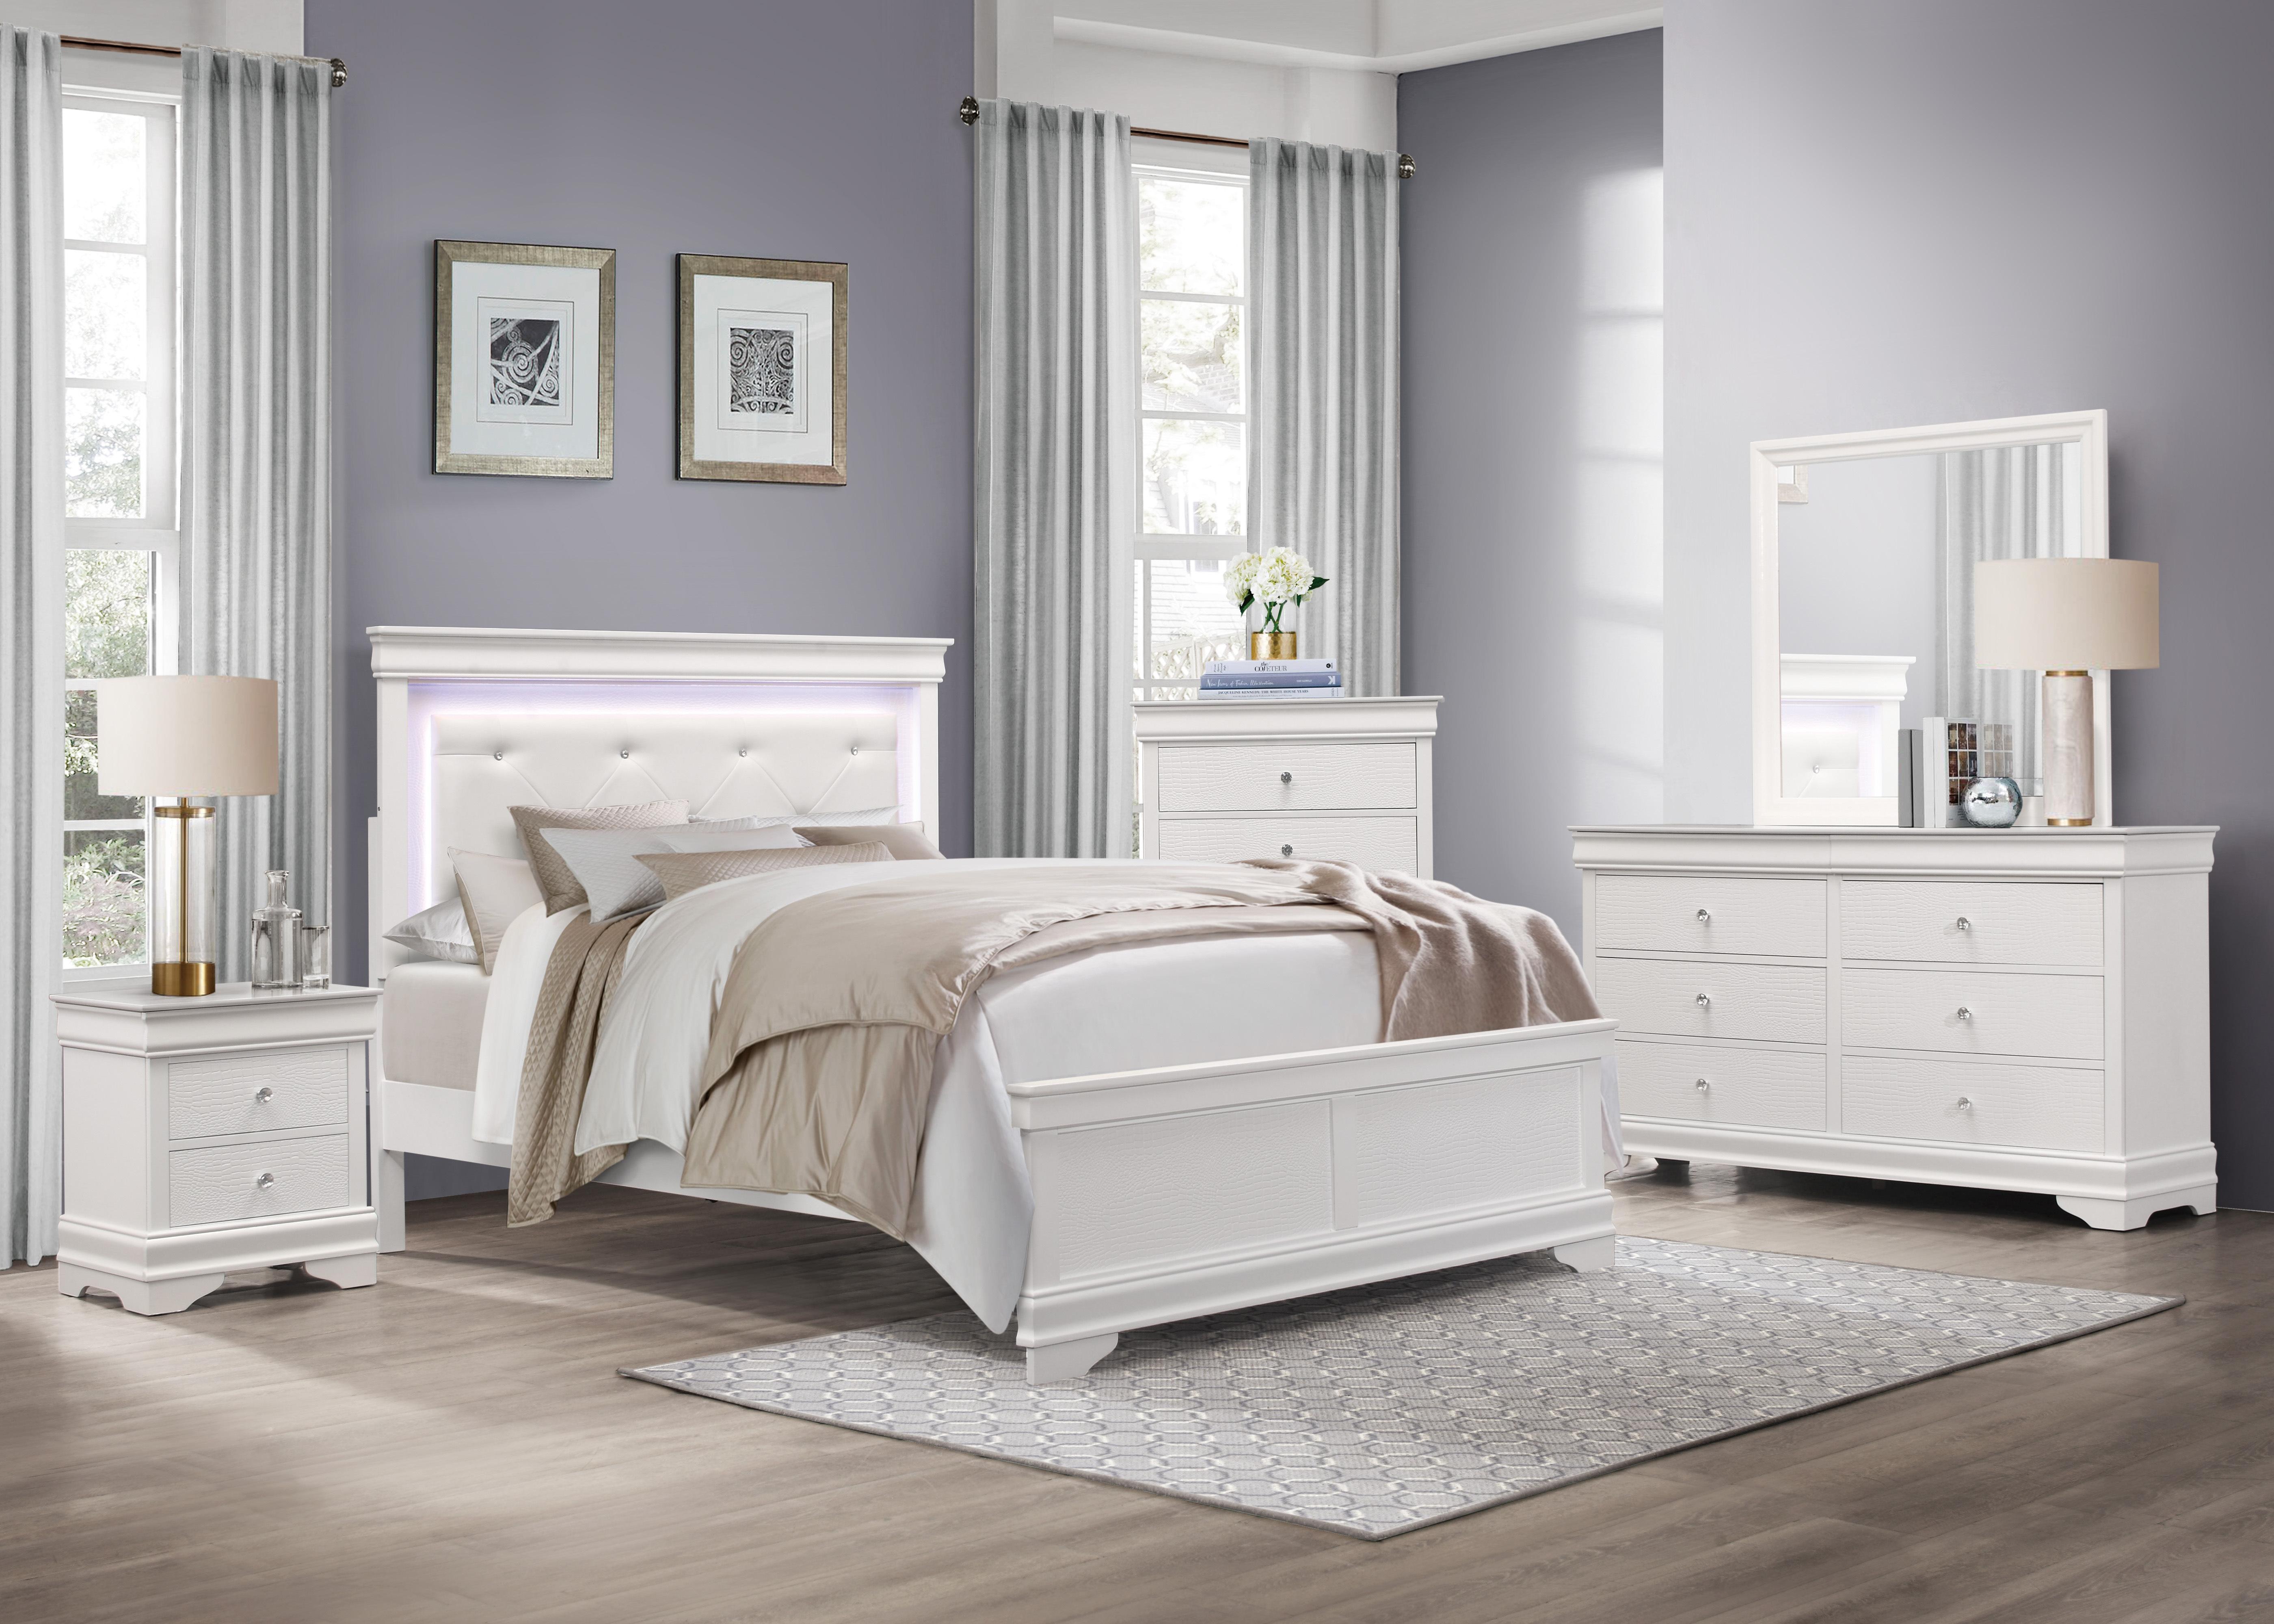 Traditional Bedroom Set 1556W-1-5PC Lana 1556W-1-5PC in White Faux Leather